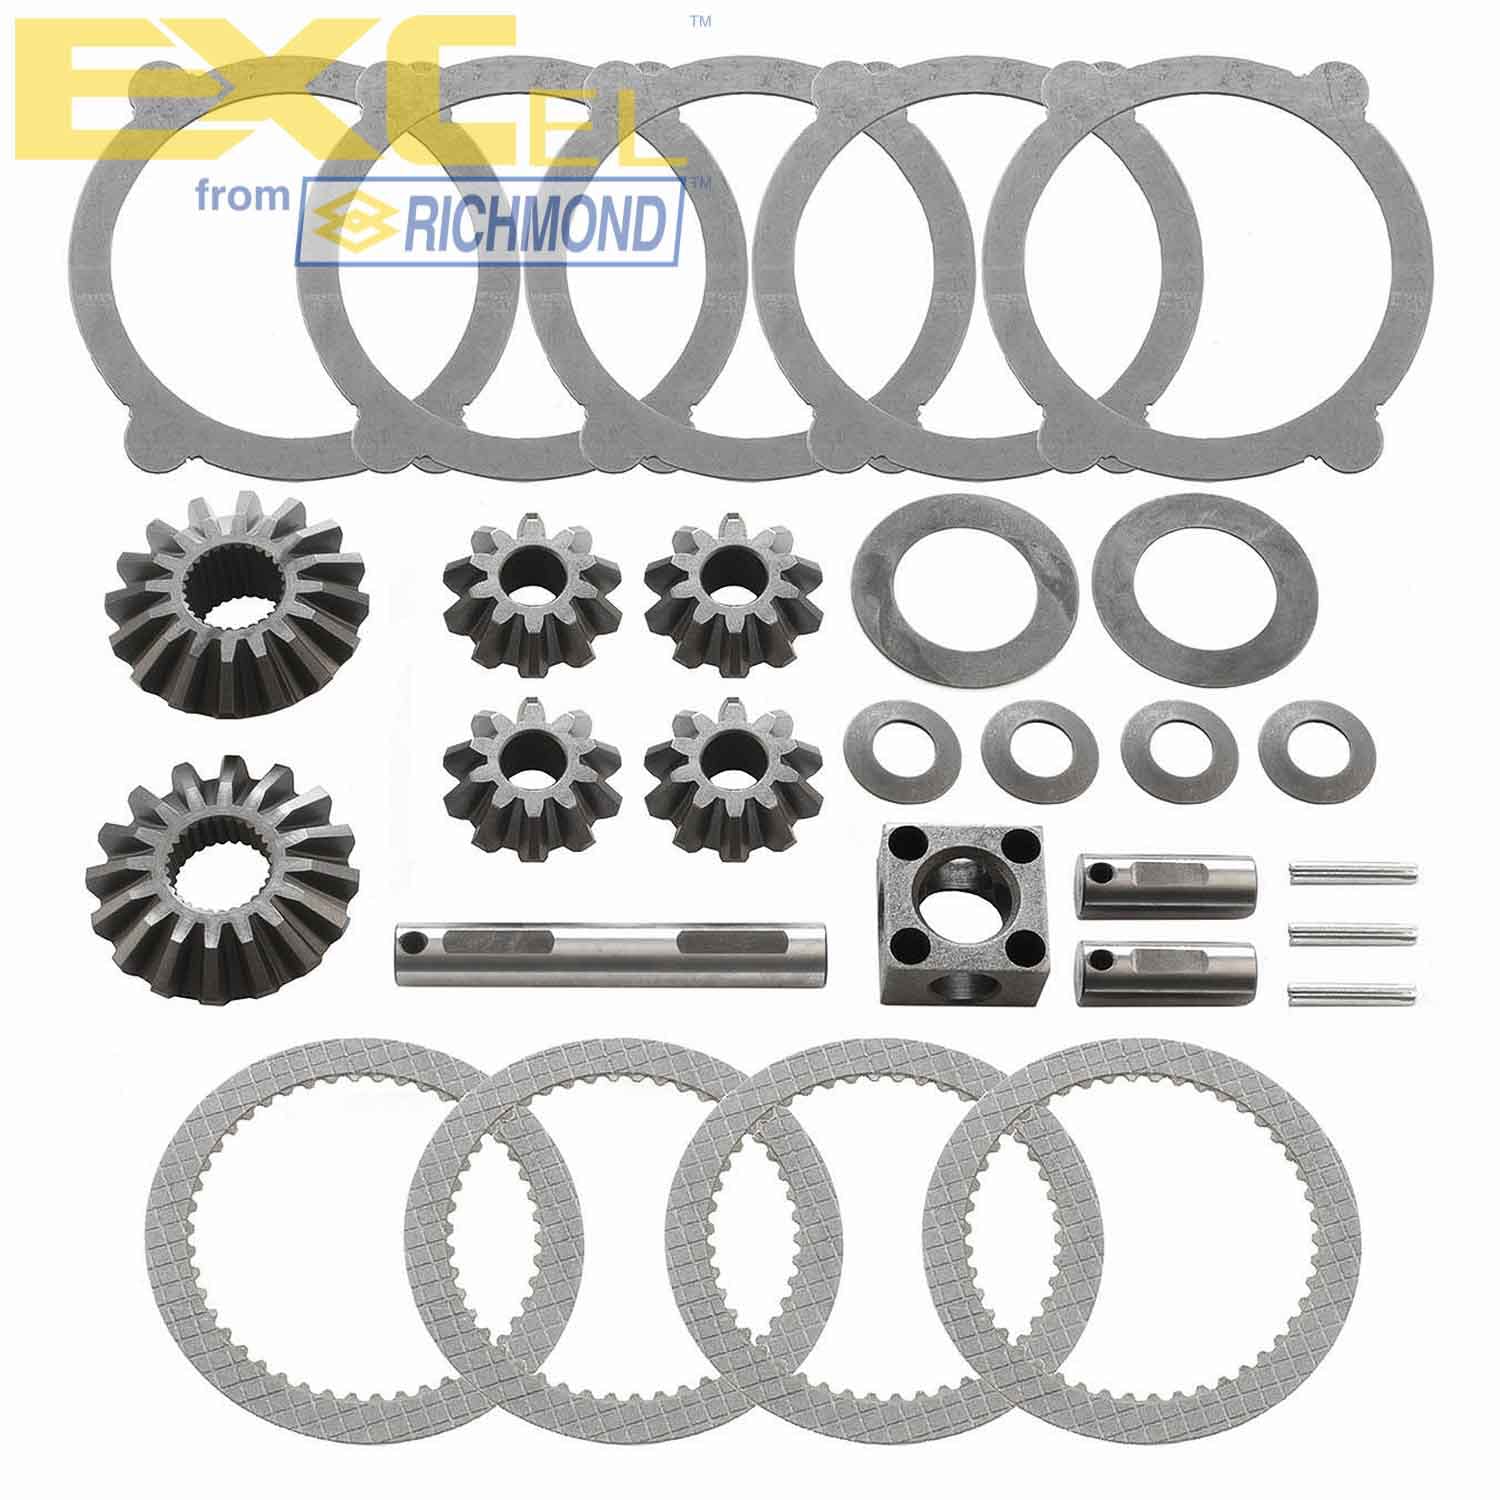 Excel XL-4030 Differential Carrier Gear Kit